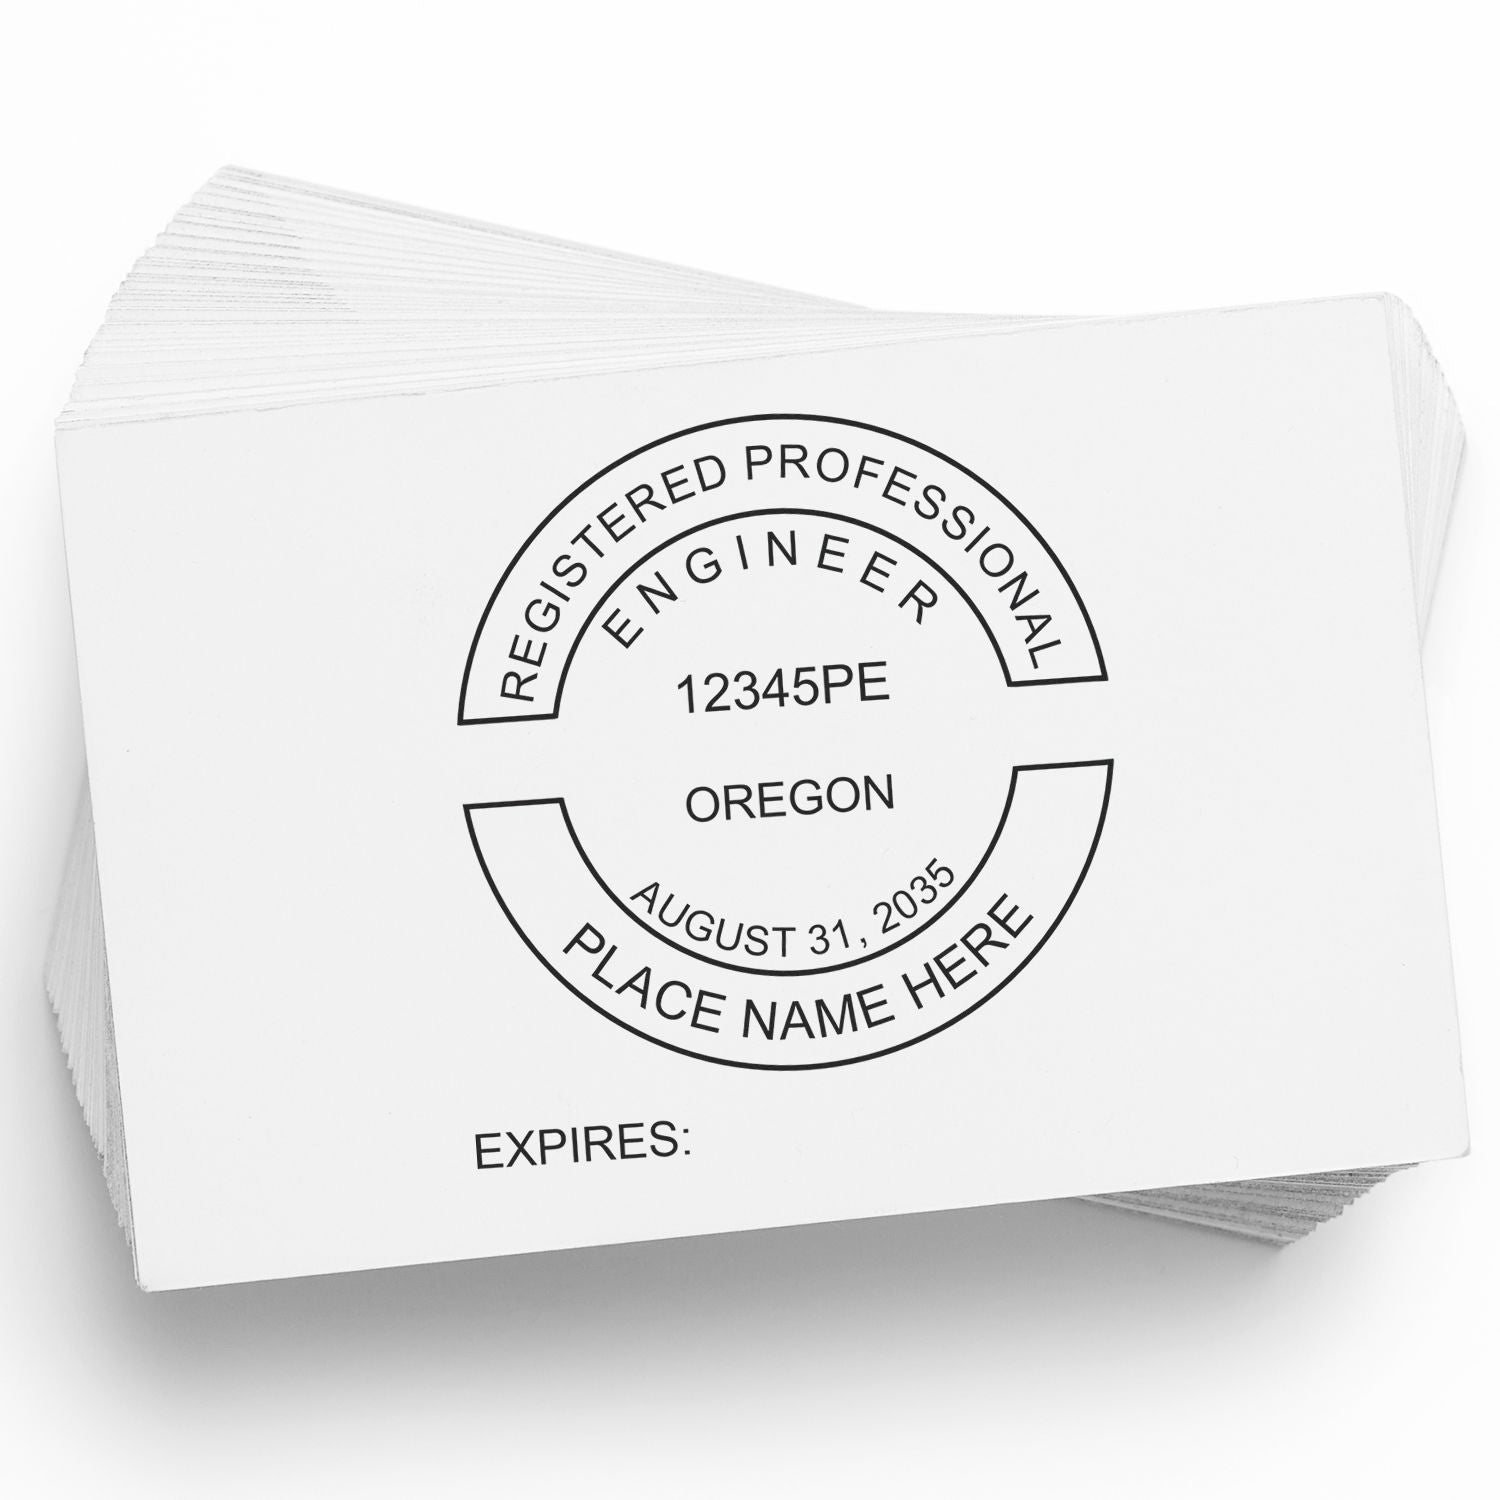 This paper is stamped with a sample imprint of the Oregon Professional Engineer Seal Stamp, signifying its quality and reliability.